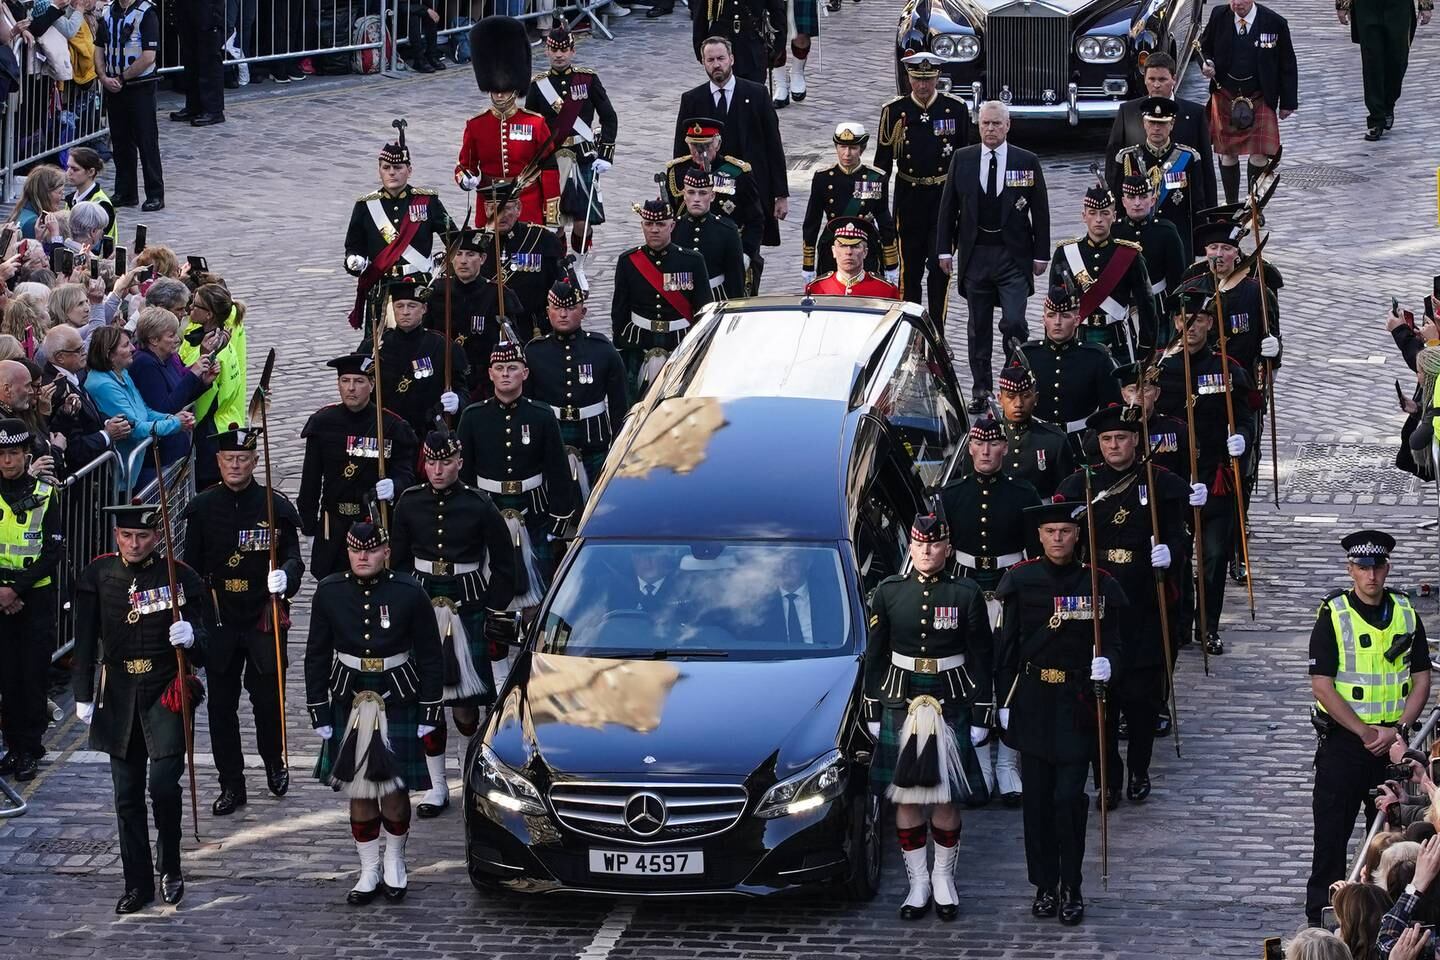 King Charles III joins the procession accompanying Queen Elizabeth II's coffin from the Palace of Holyroodhouse along the Royal Mile to St Giles Cathedral in Edinburgh. Getty Images